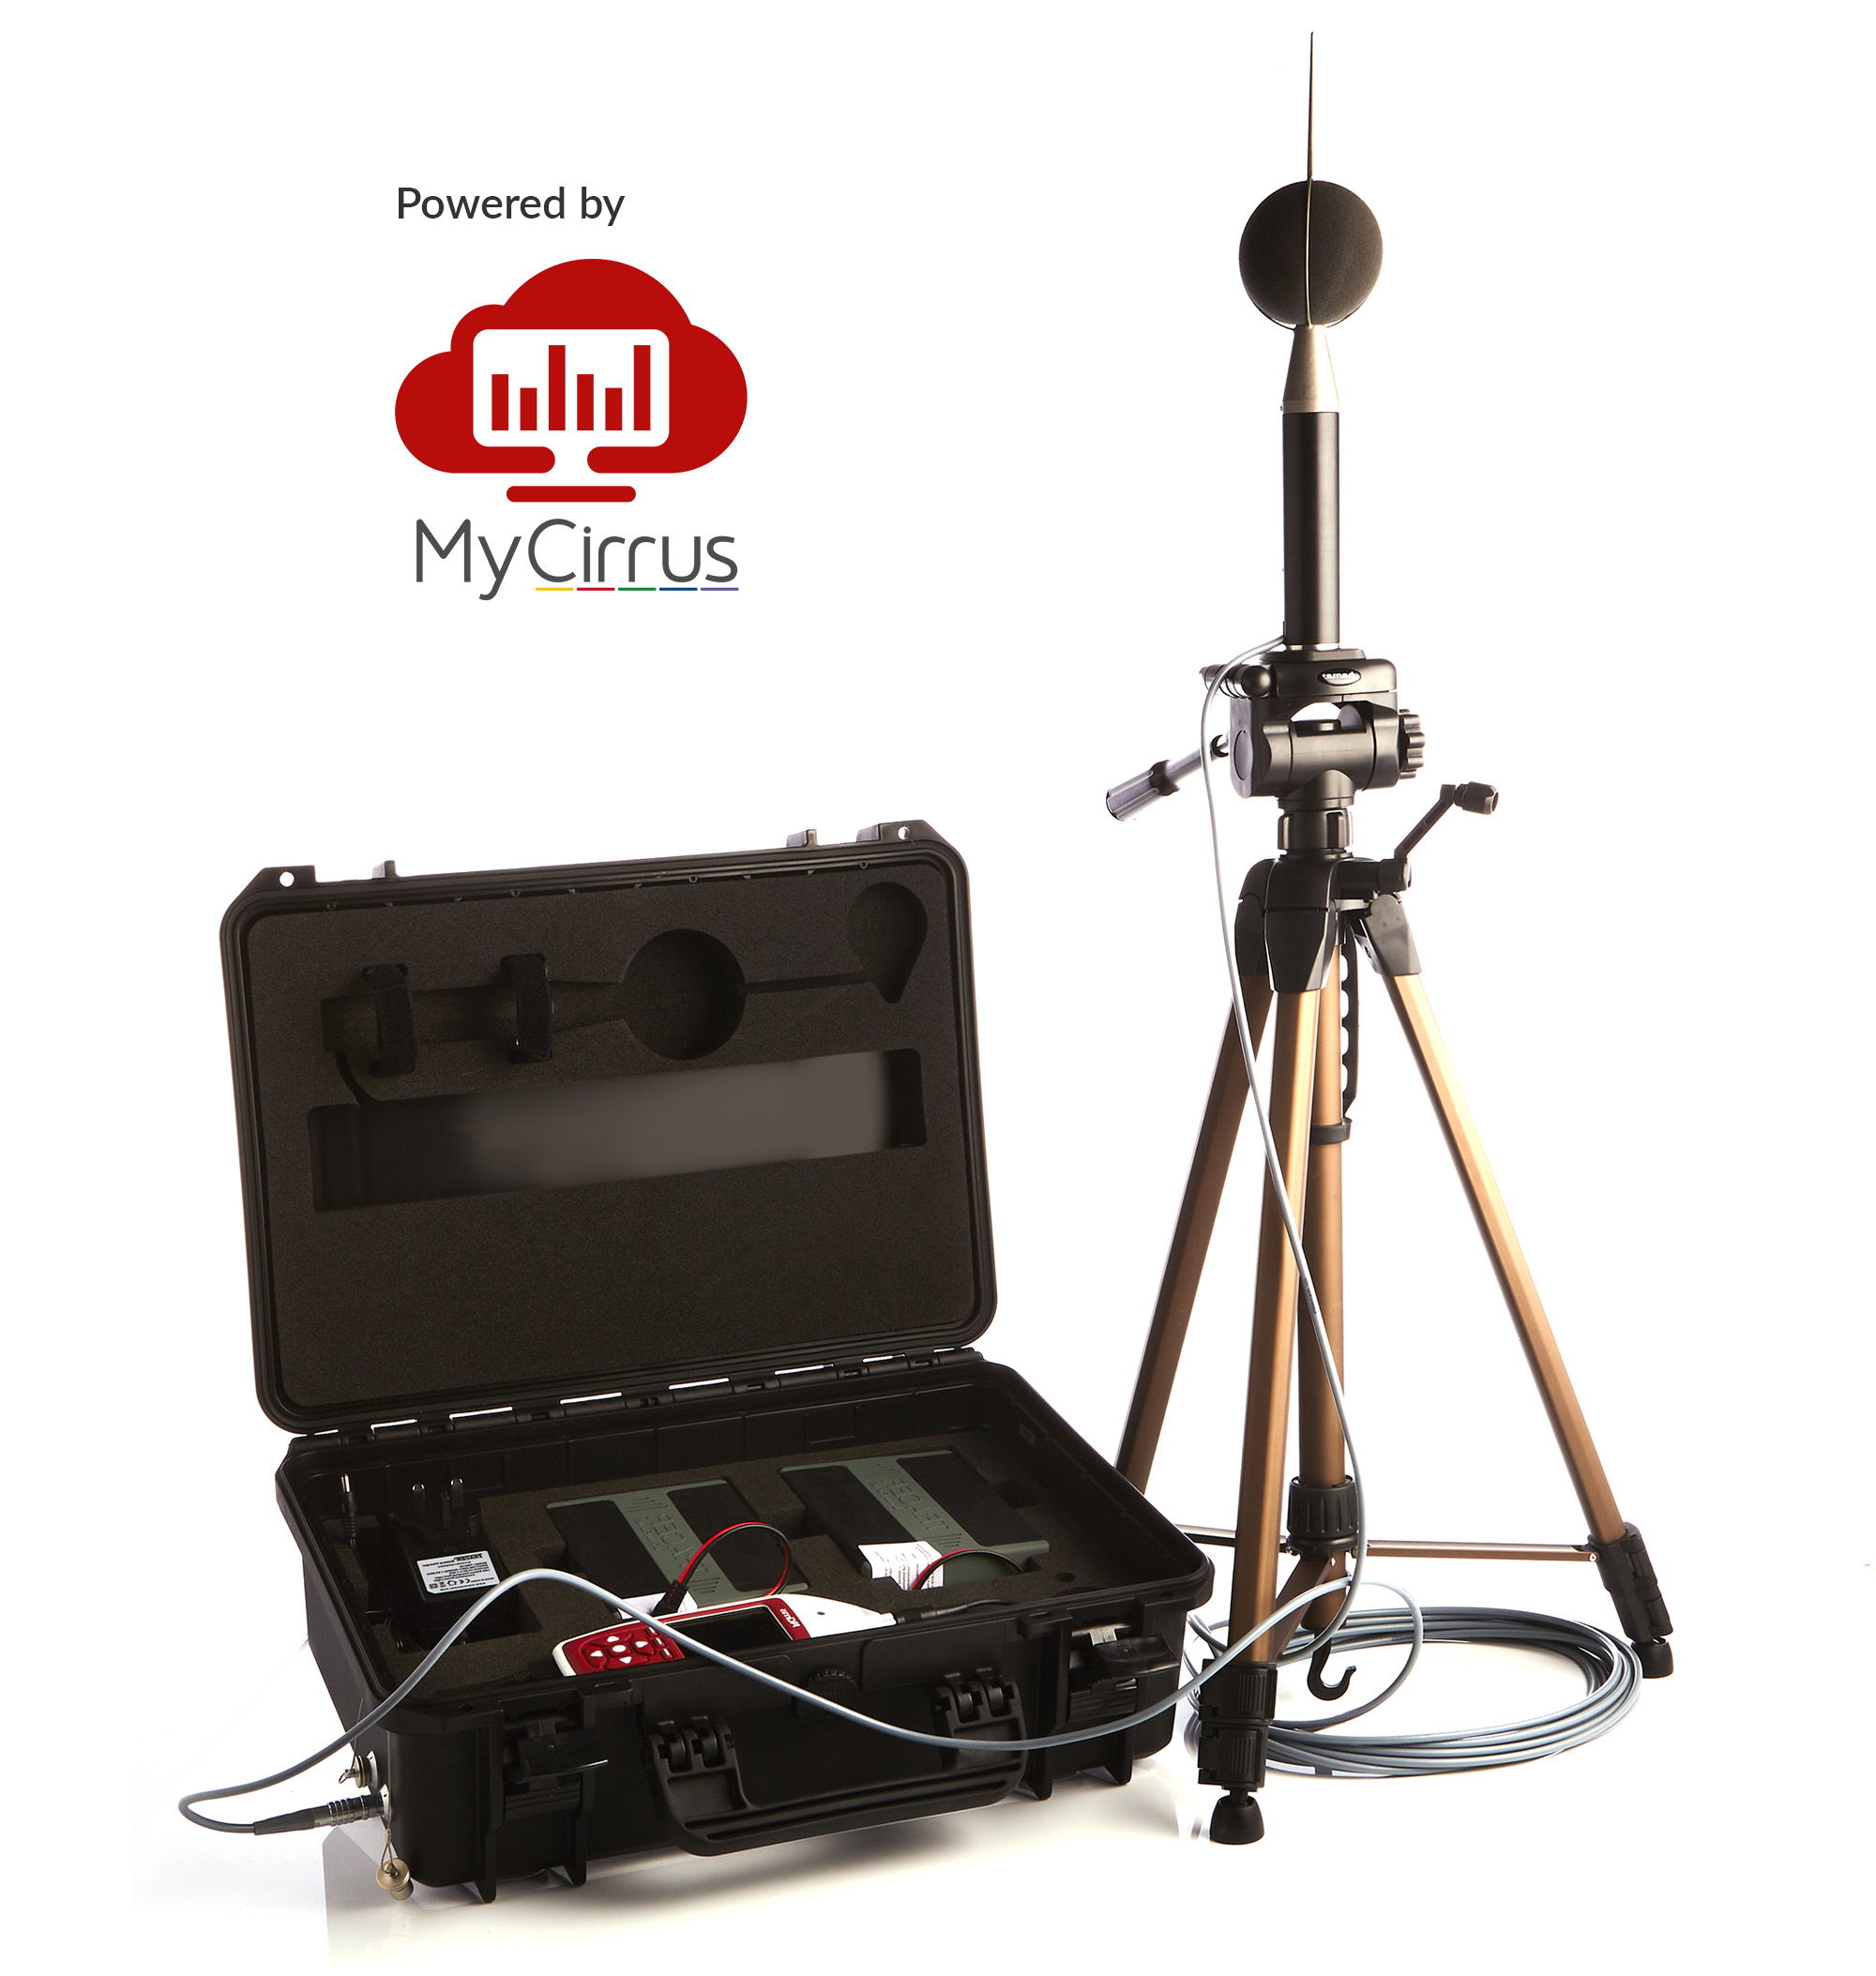 The Environmental Noise Monitoring Kit from Cirrus Research